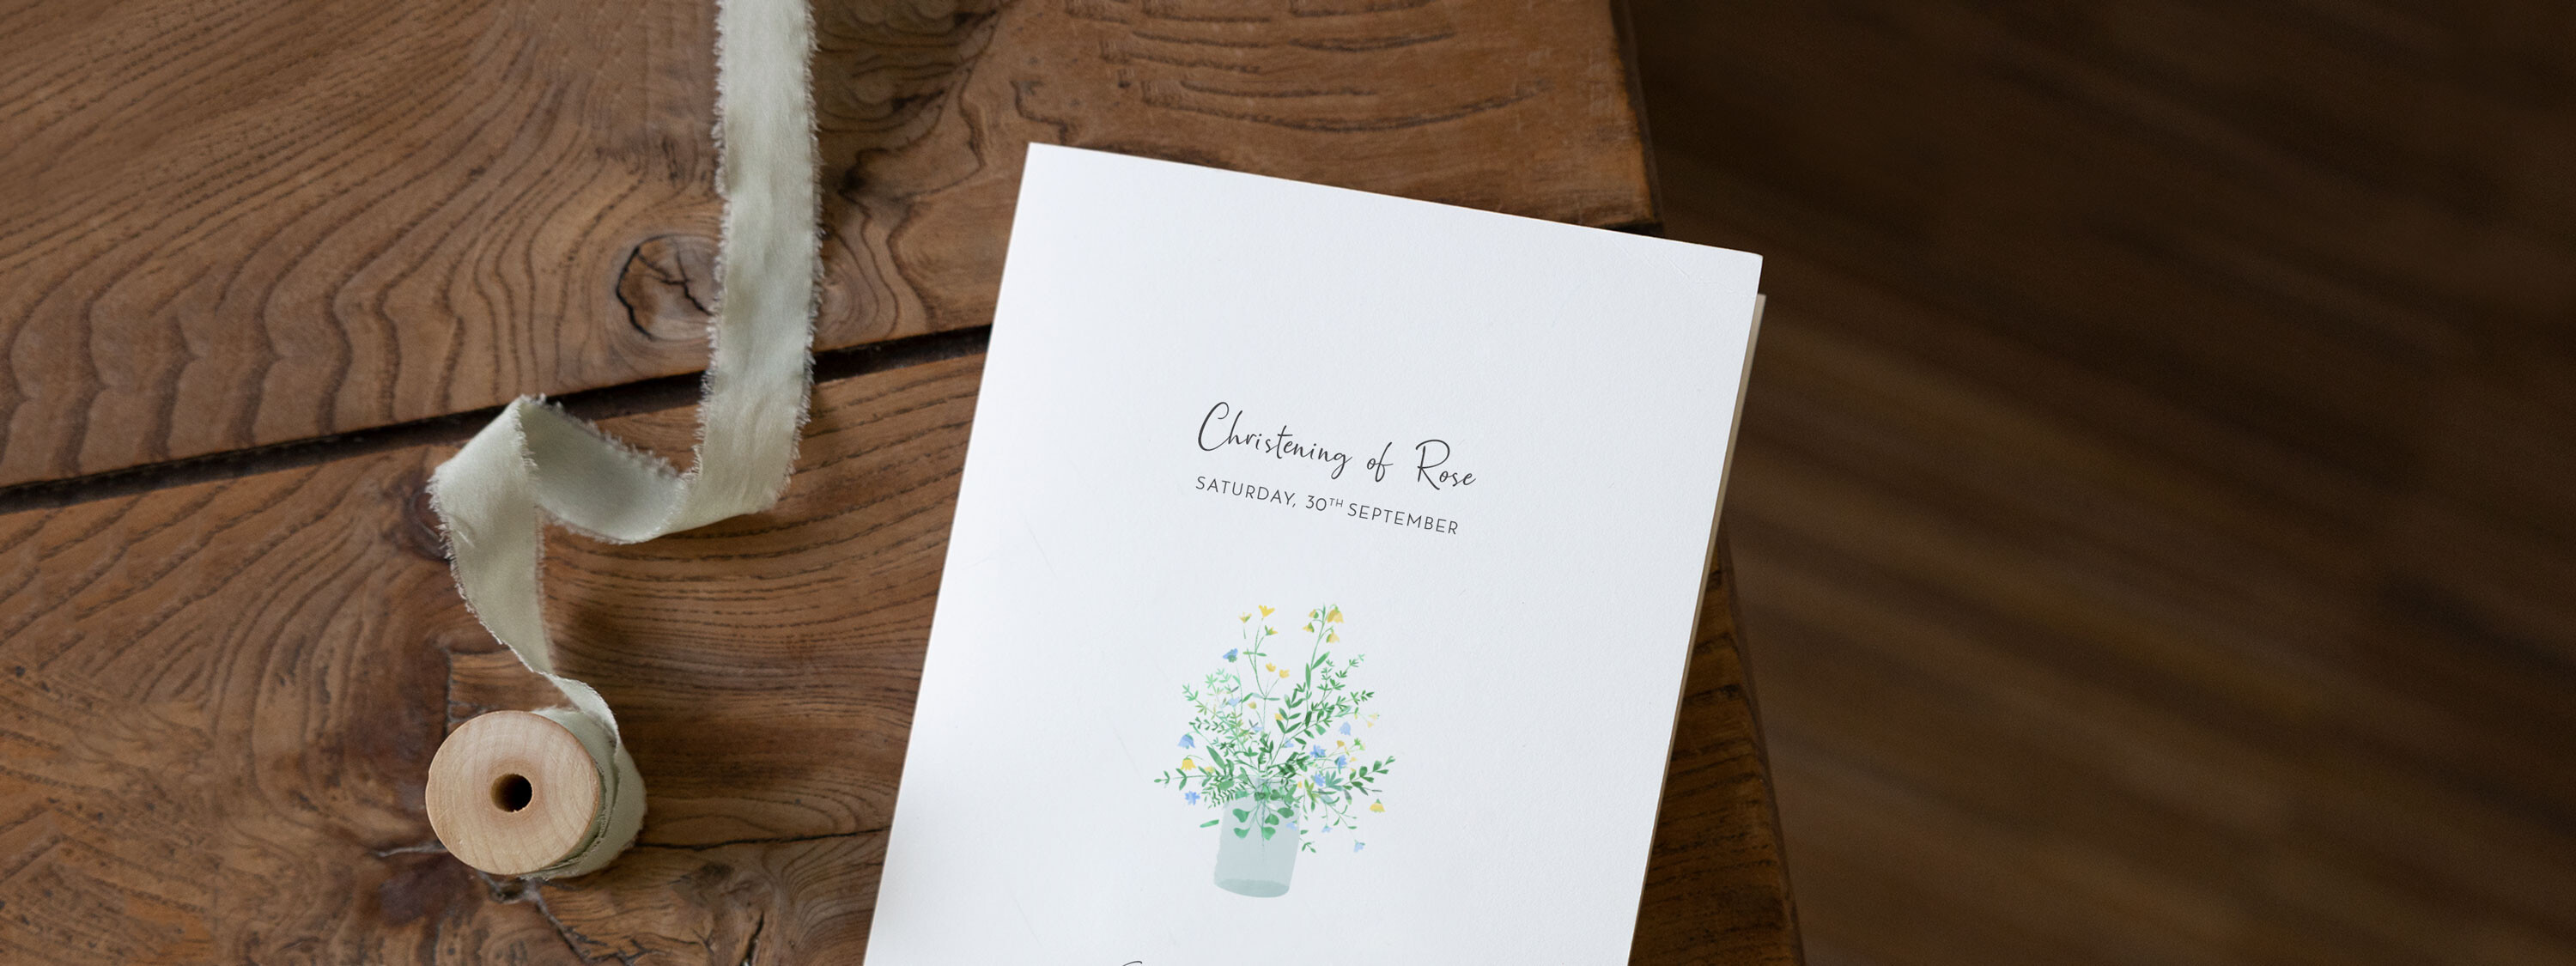 Christening Order of Service Booklets Cover from Bikini sous la pluie 